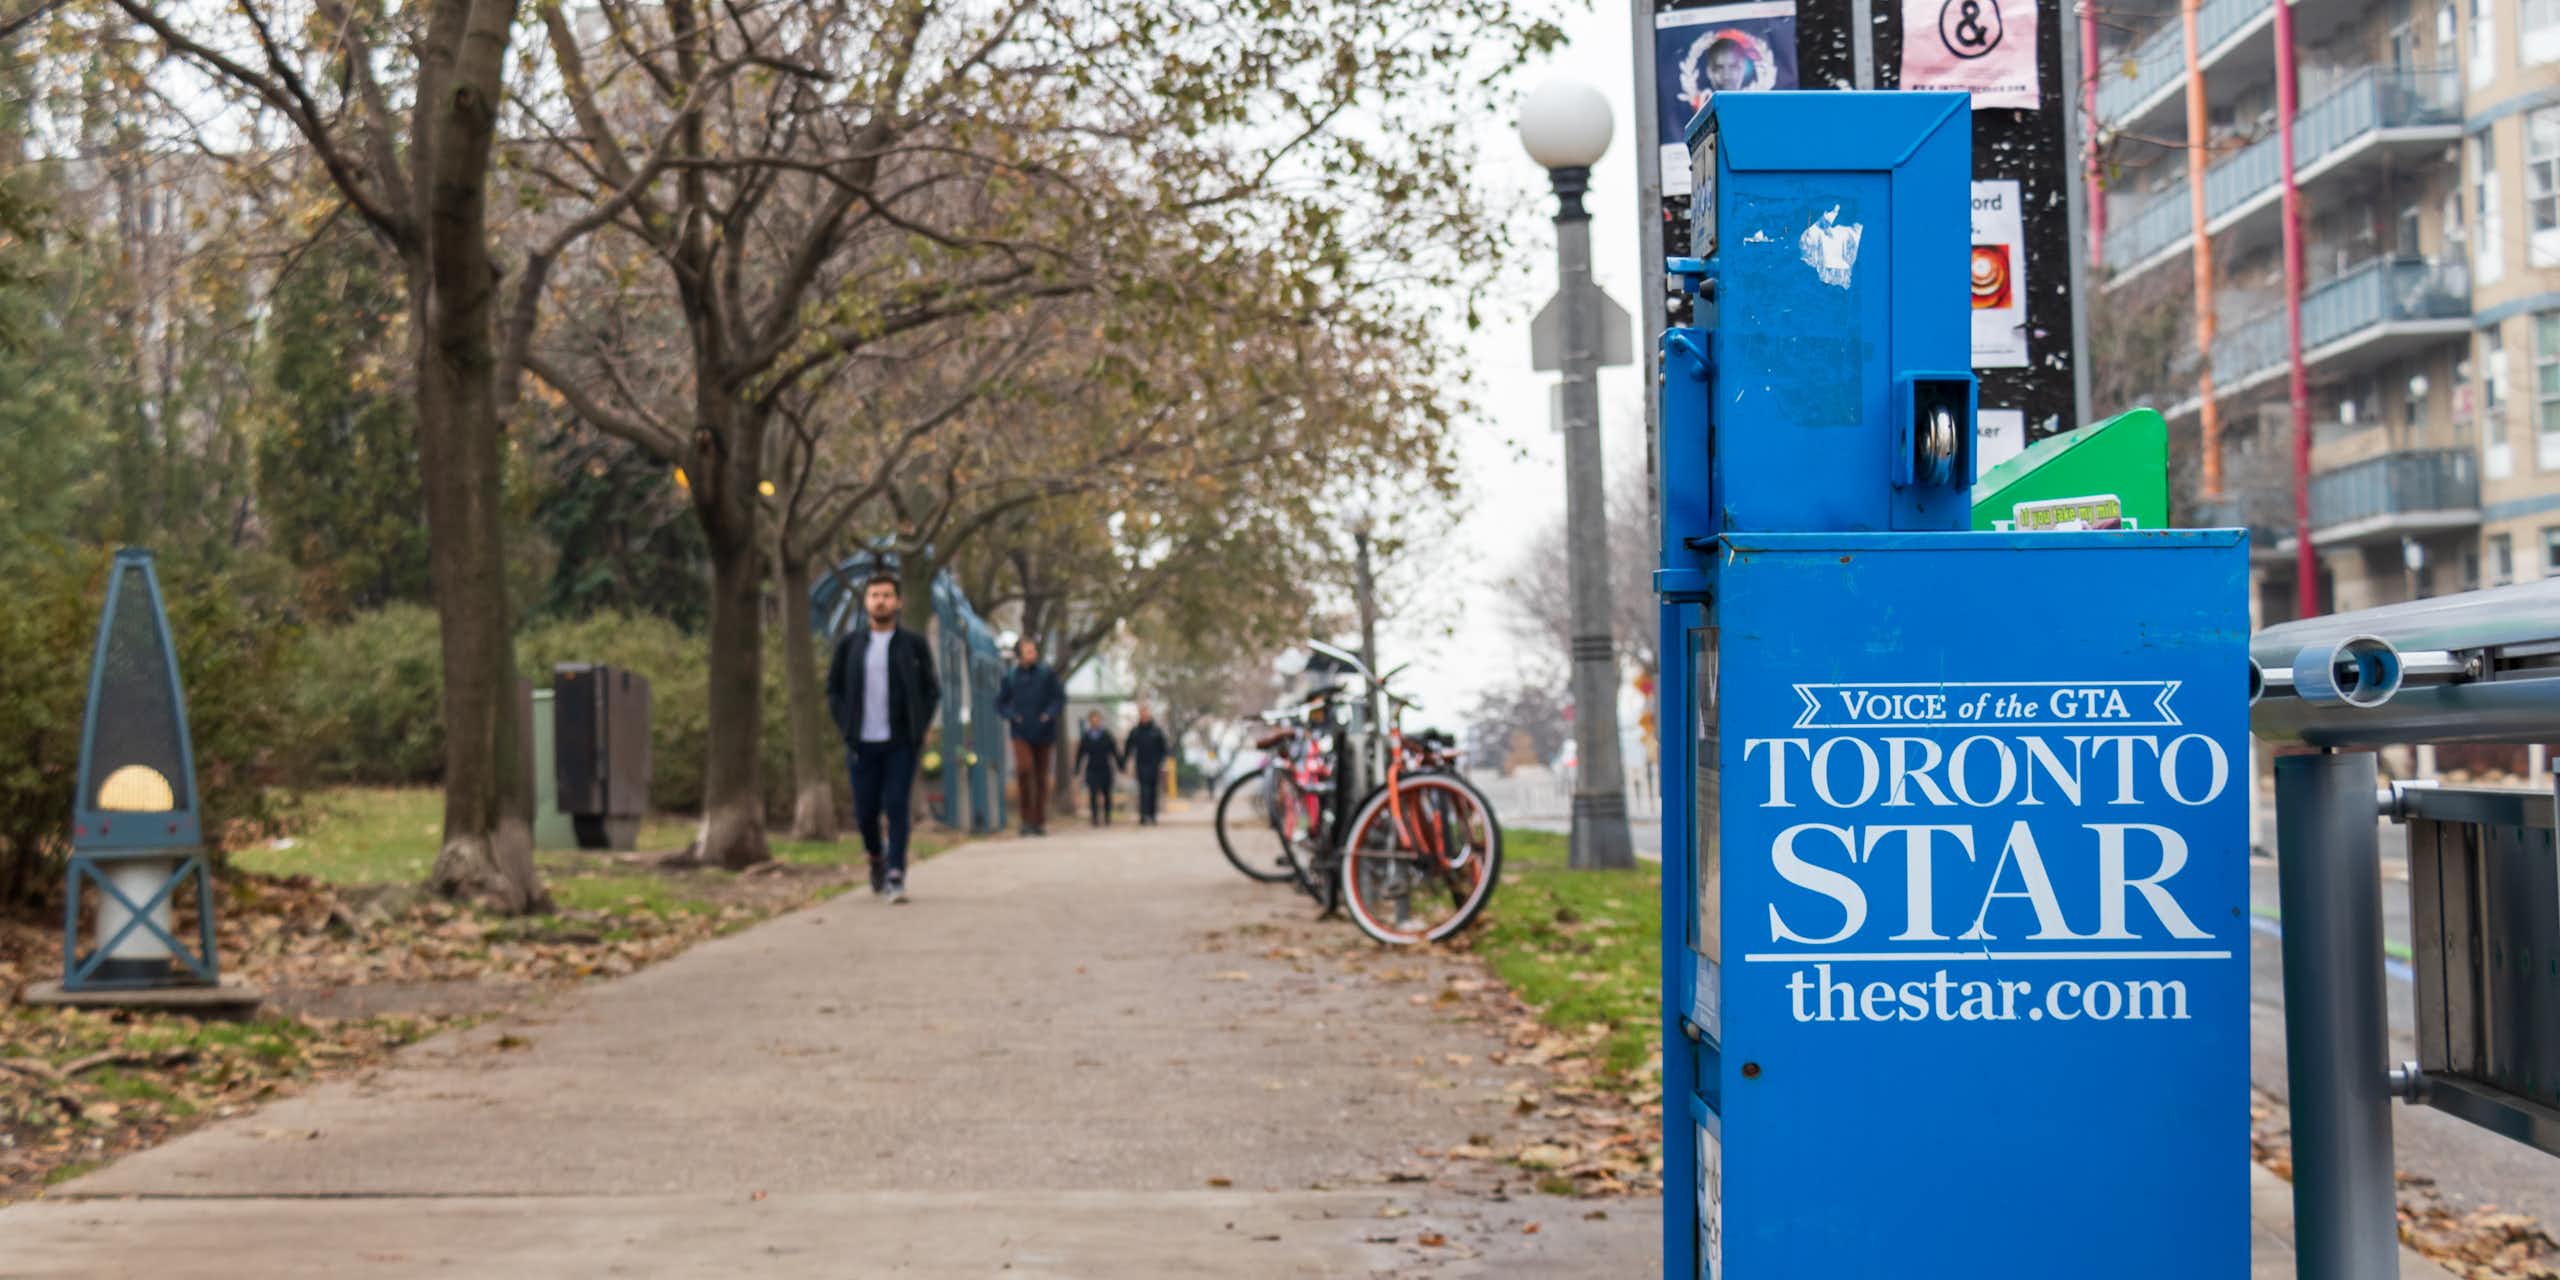 A newspaper vending machine with the Toronto Start logo on the side sits beside a city sidewalk